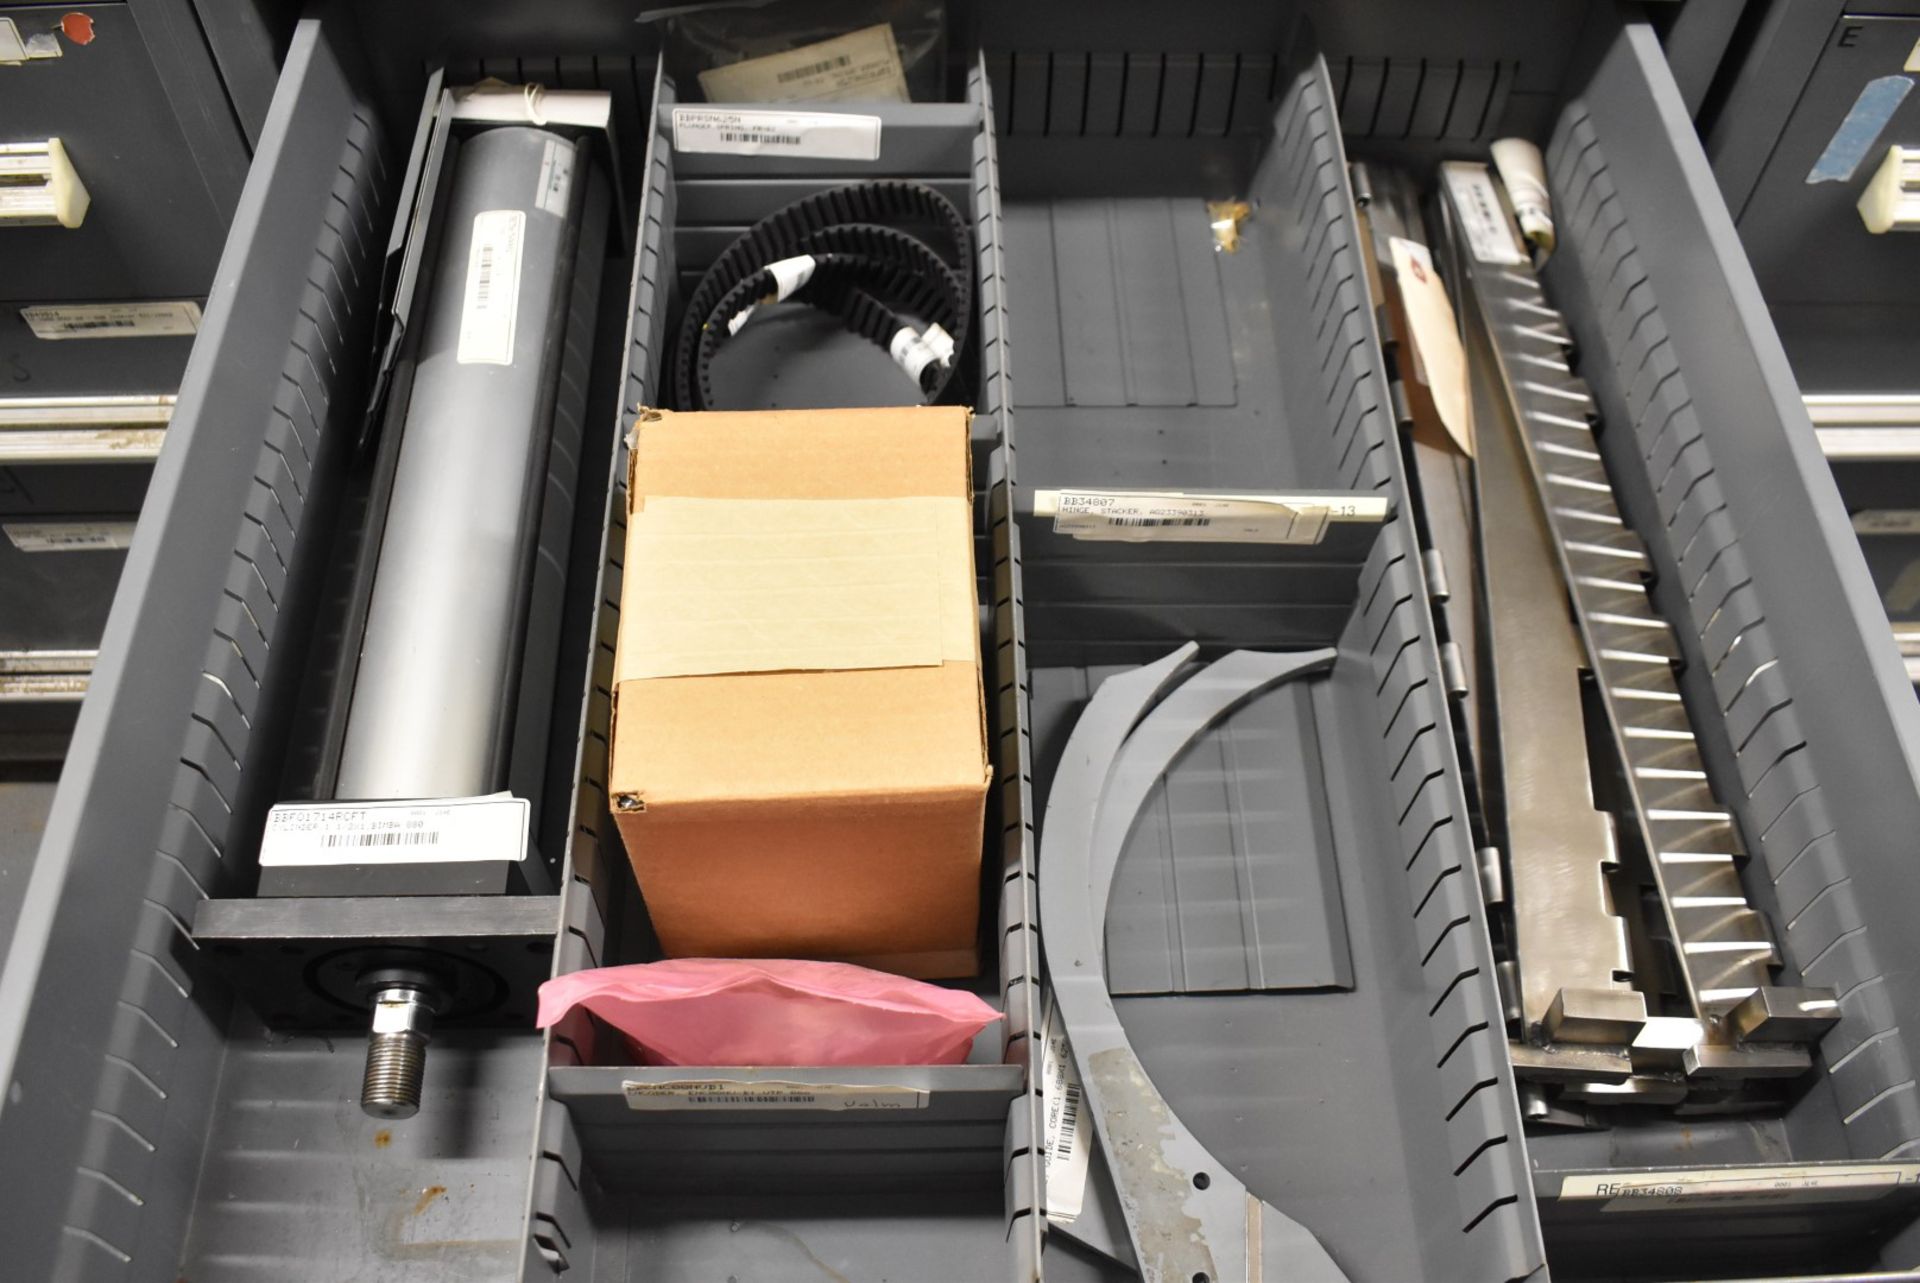 LOT/ CONTENTS OF CABINET - SALWASSER SPARE PARTS & COMPONENTS (TOOL CABINET NOT INCLUDED) [RIGGING - Image 6 of 8